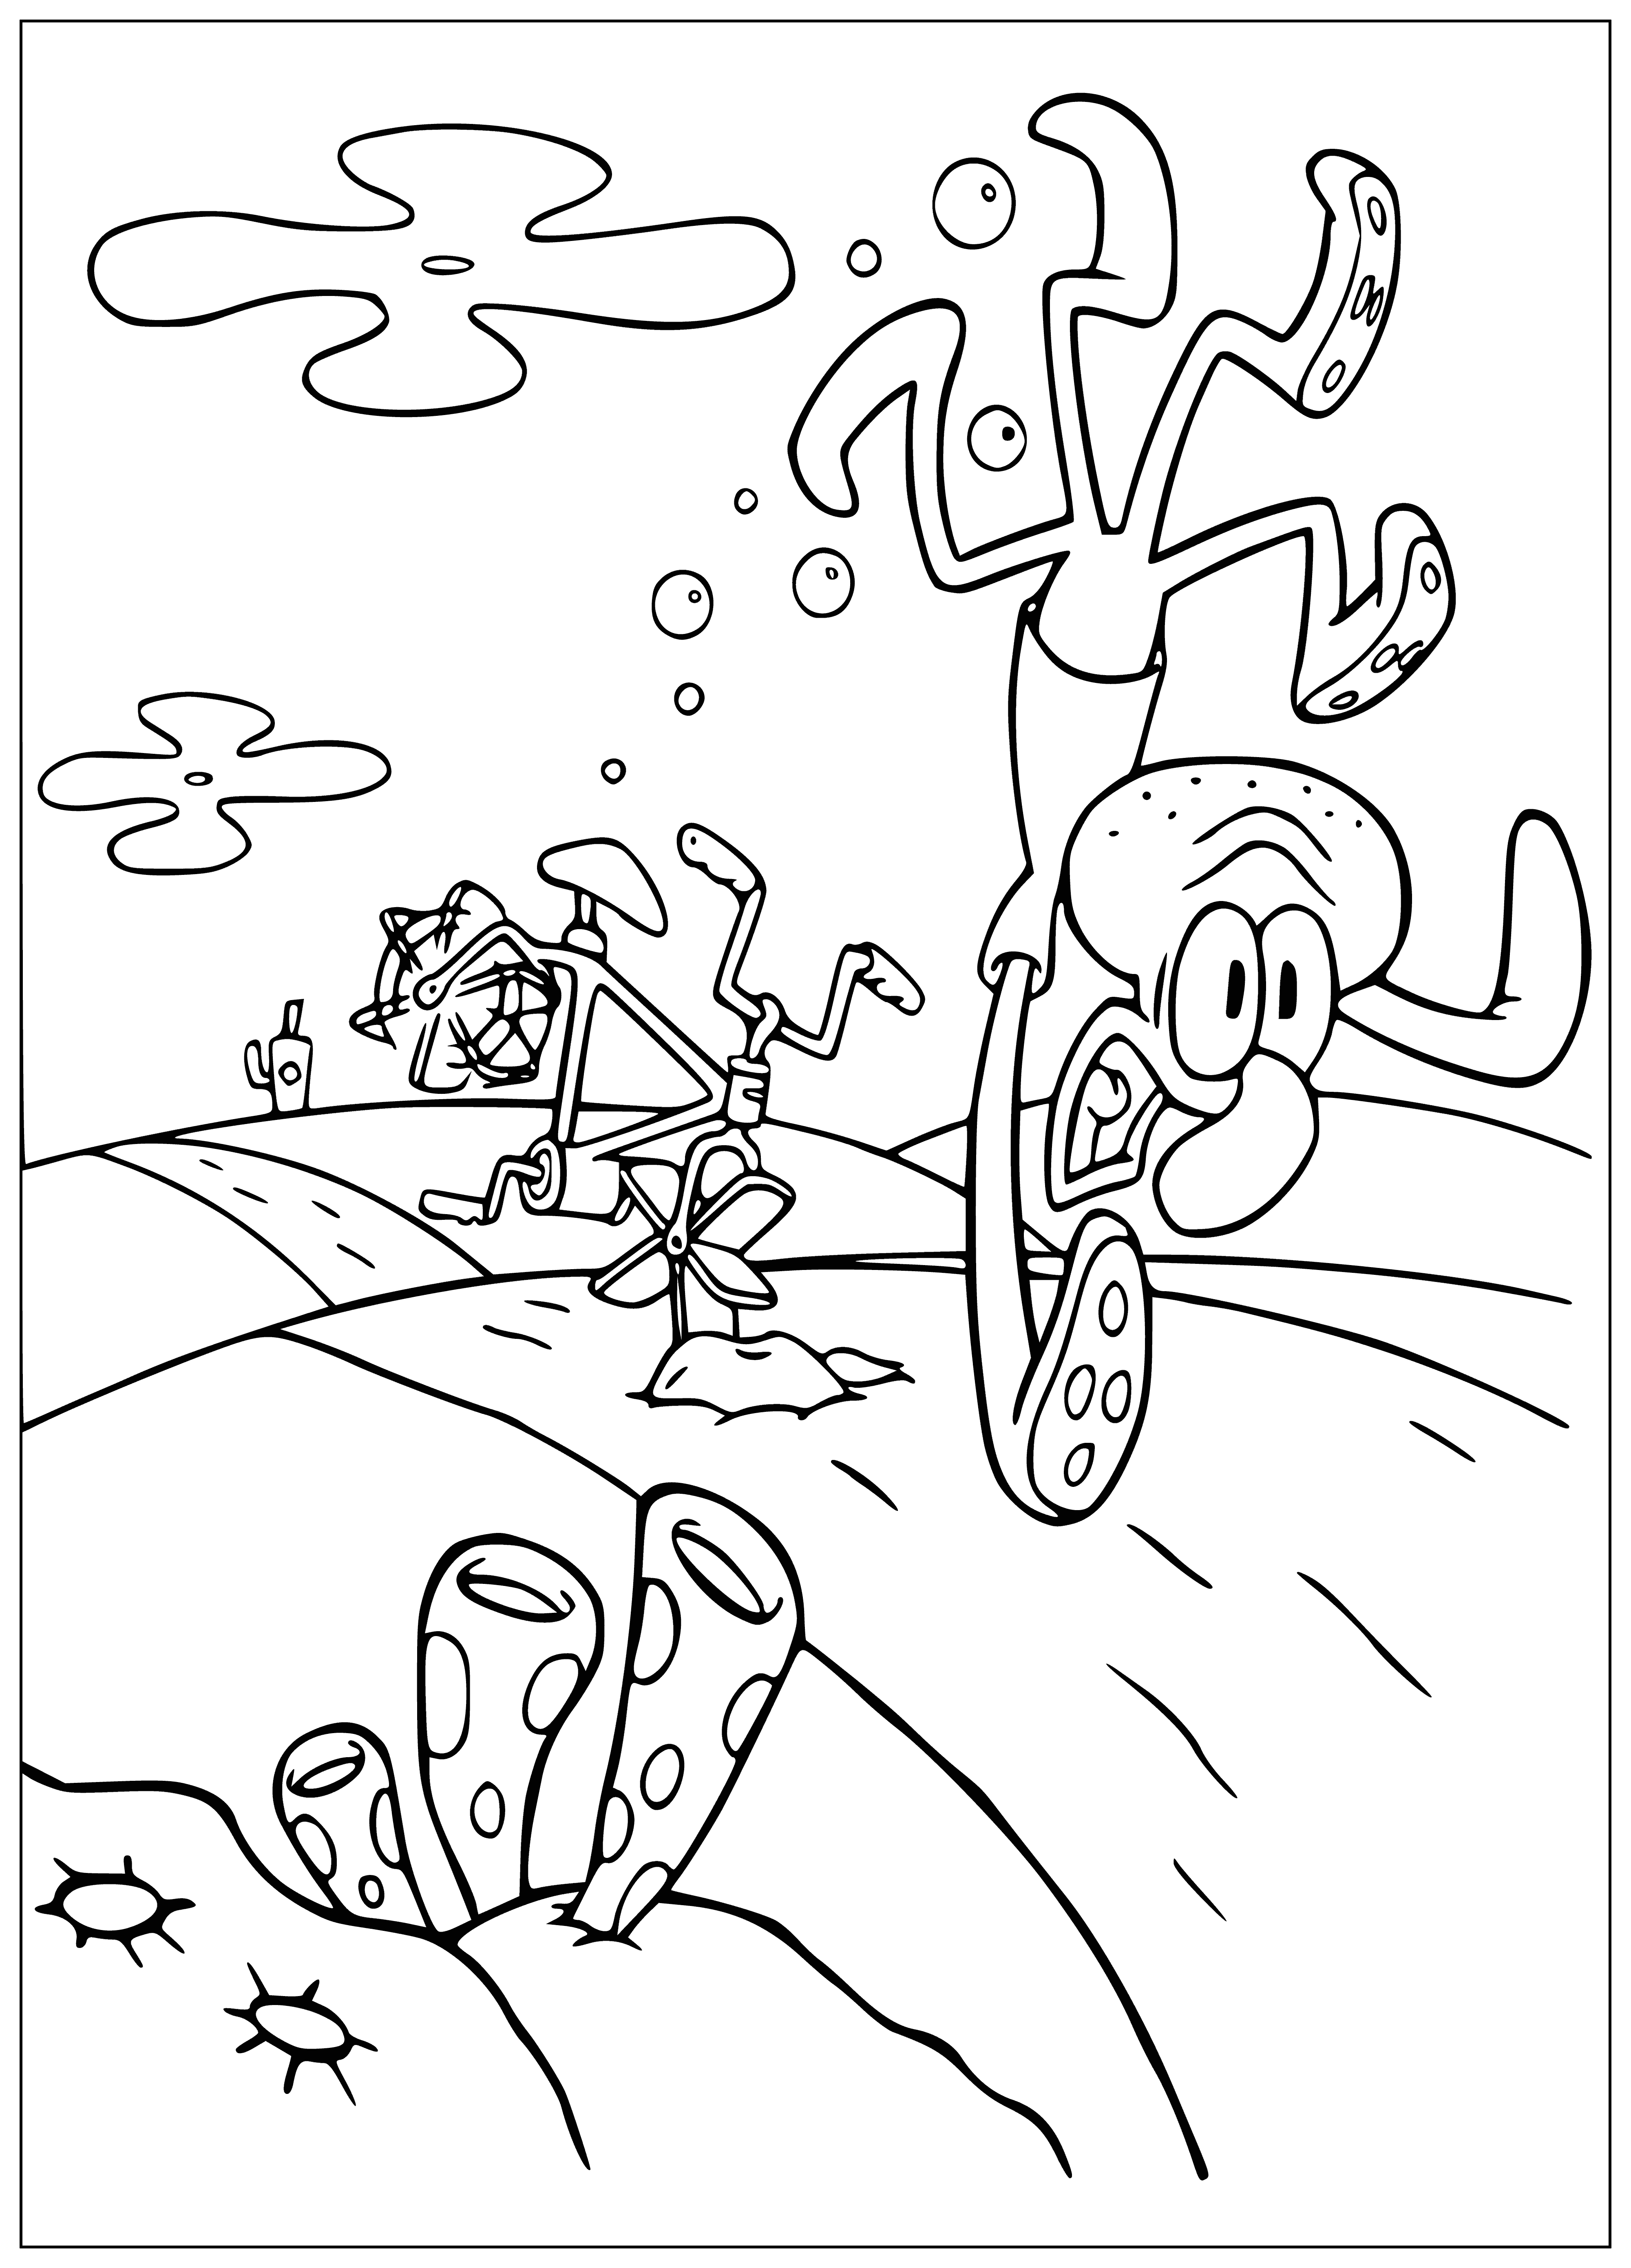 Falling off the bike coloring page